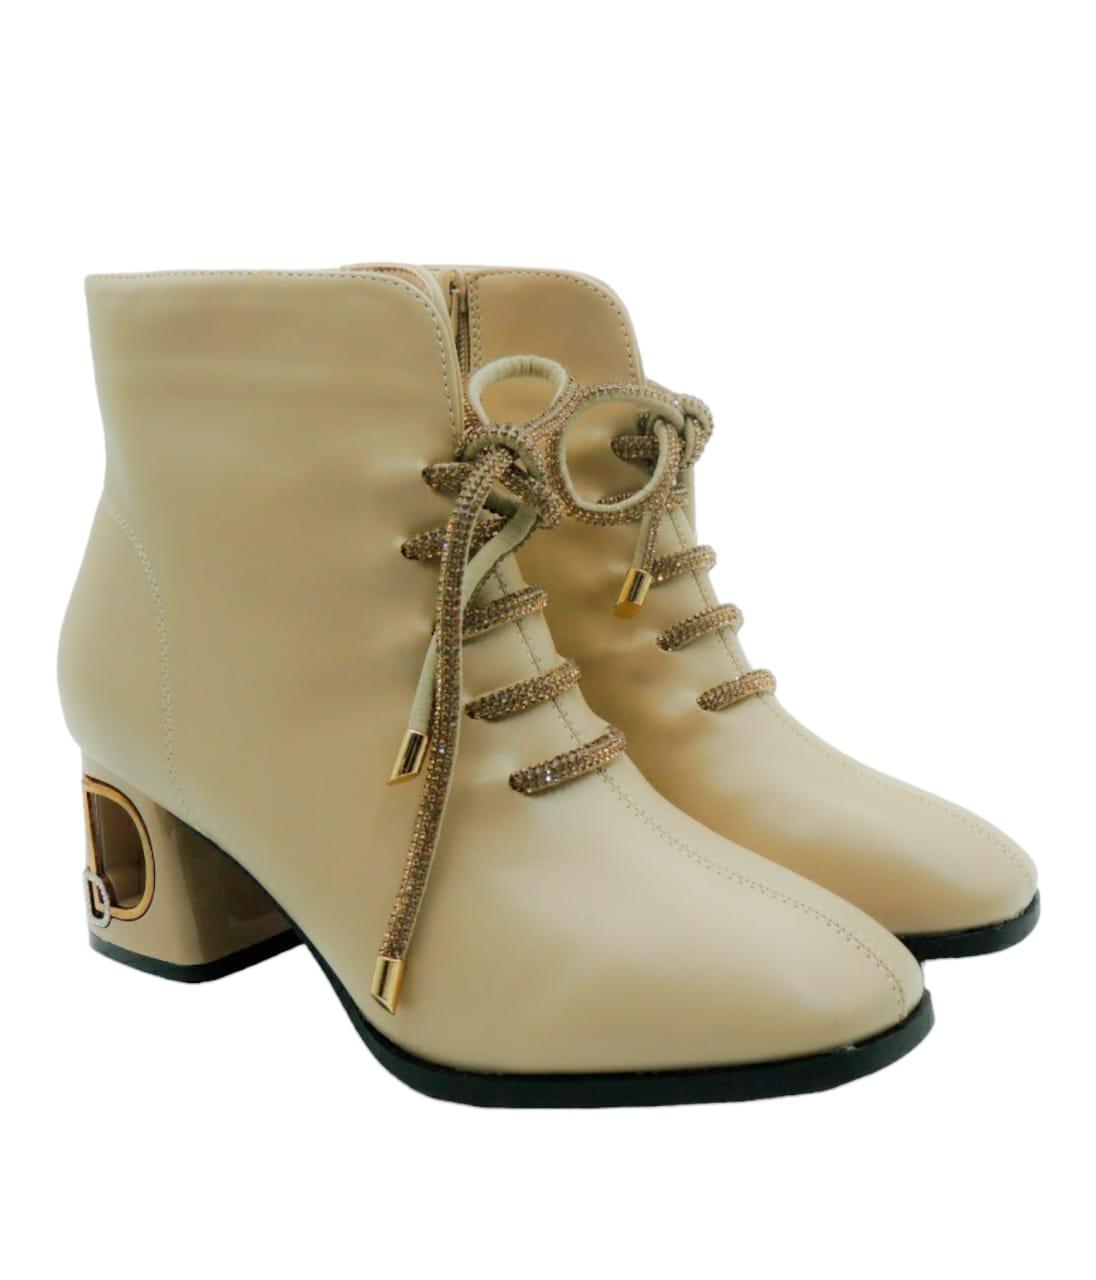 MS DD LACEY PATENT BOOTS, SHOES, CORADO, beige, boots, footwear, shoes, women, coradomoda, coradomoda.com